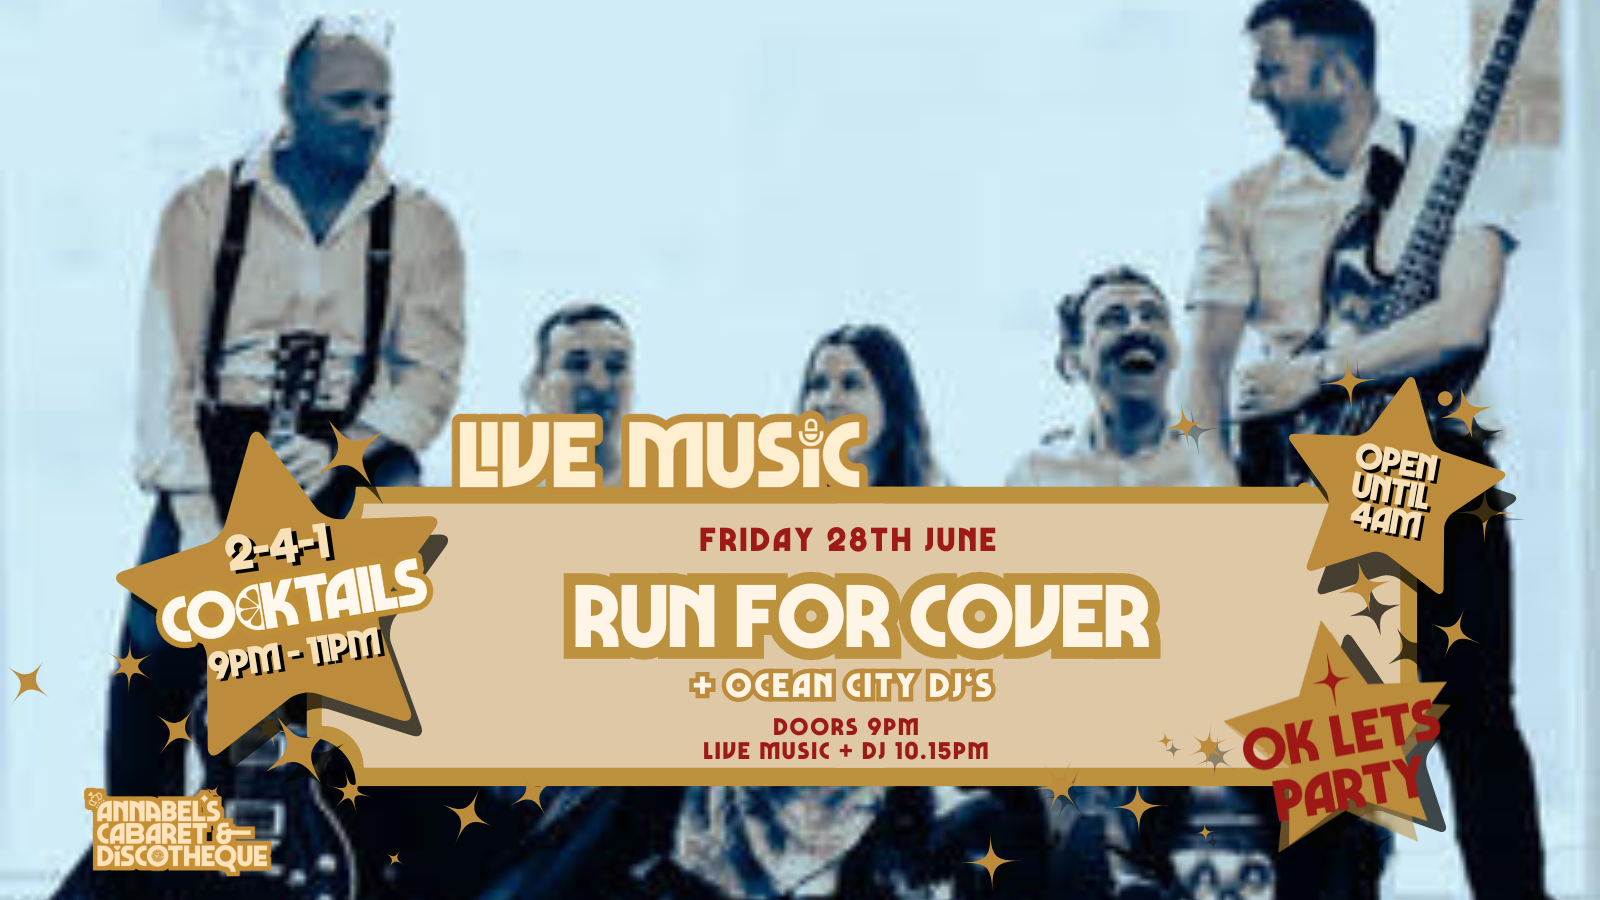 ‘Live Music: RUN FOR COVER // Annabel’s Cabaret & Discotheque